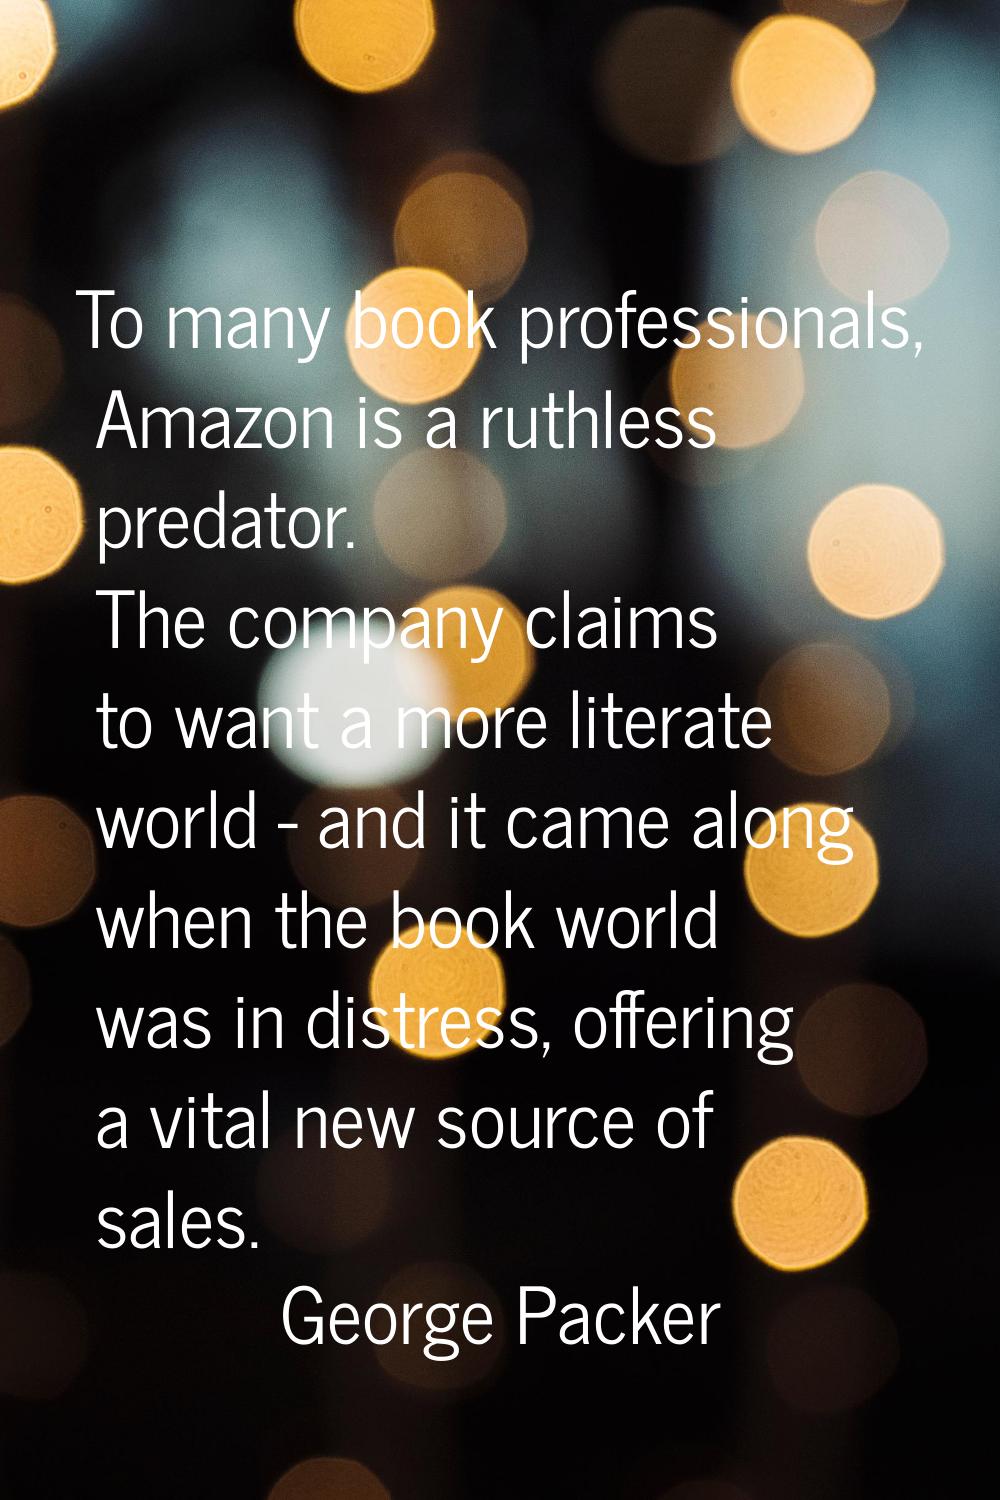 To many book professionals, Amazon is a ruthless predator. The company claims to want a more litera